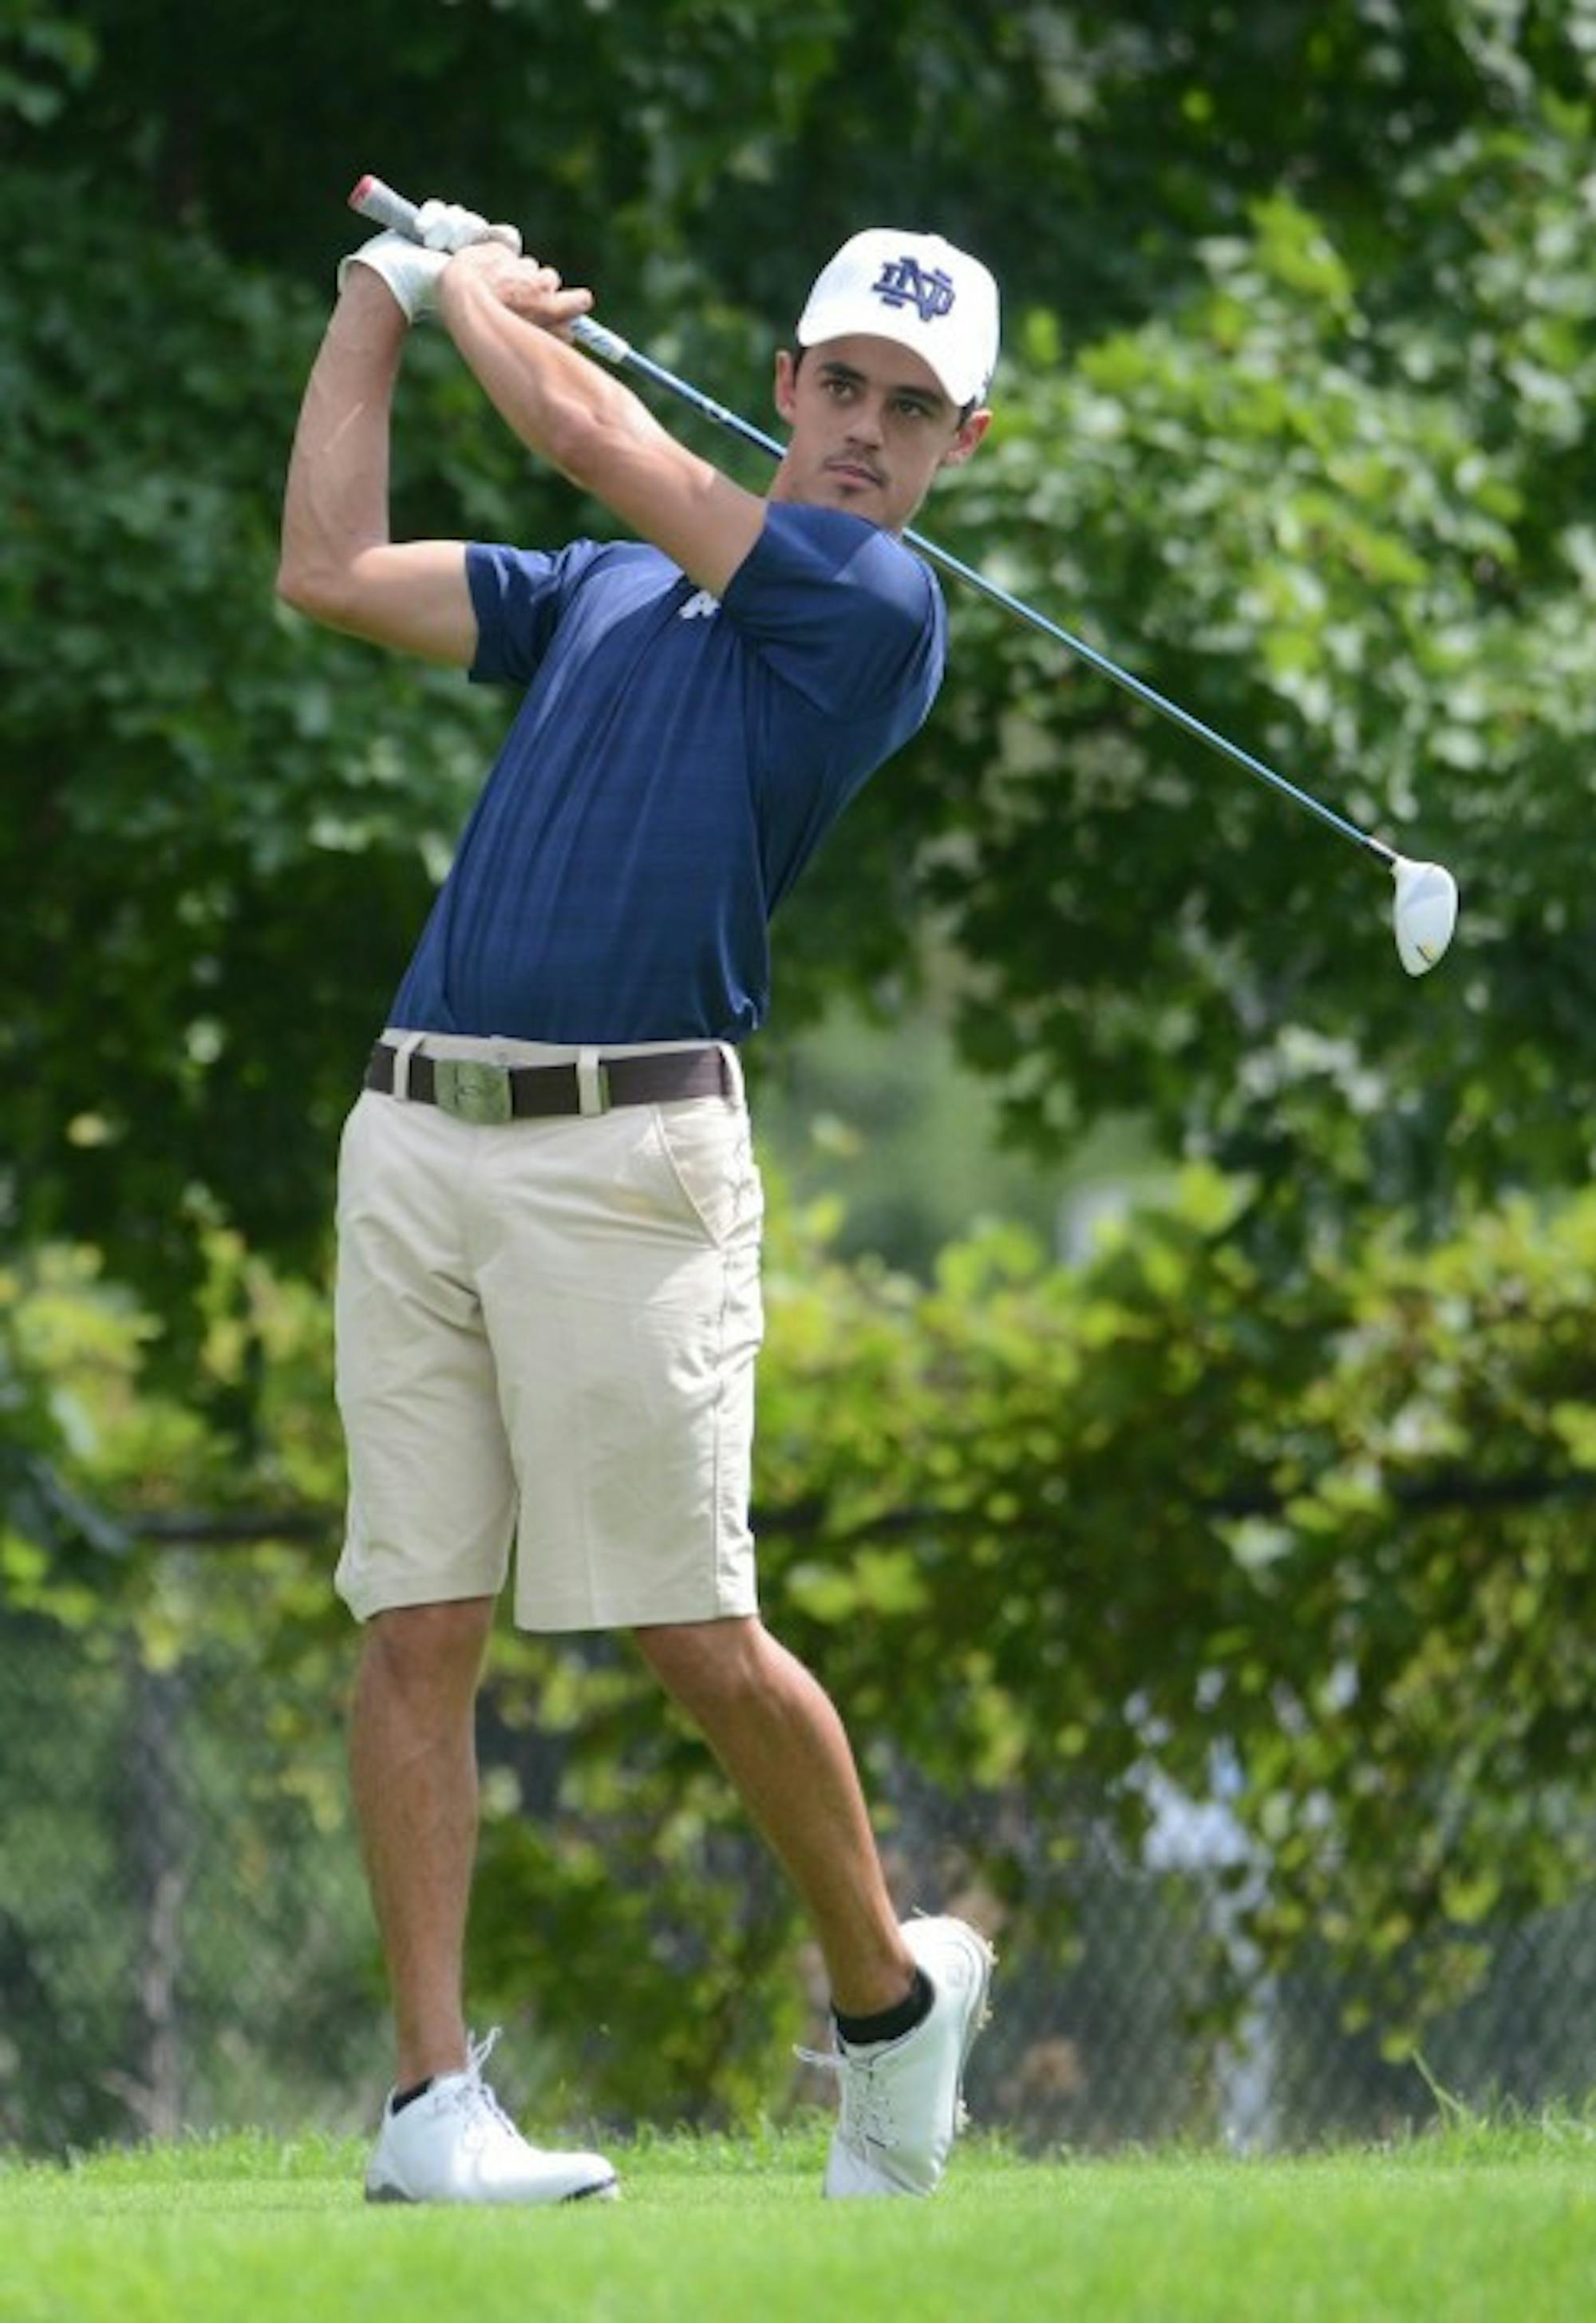 Senior Zach Toste finishes his backswing at the Notre Dame Kickoff Challenge on Aug. 31, 2014 at the Warren Golf Course. Toste finished 22nd in this year’s Notre Dame Kickoff Challenge with a score of 156.